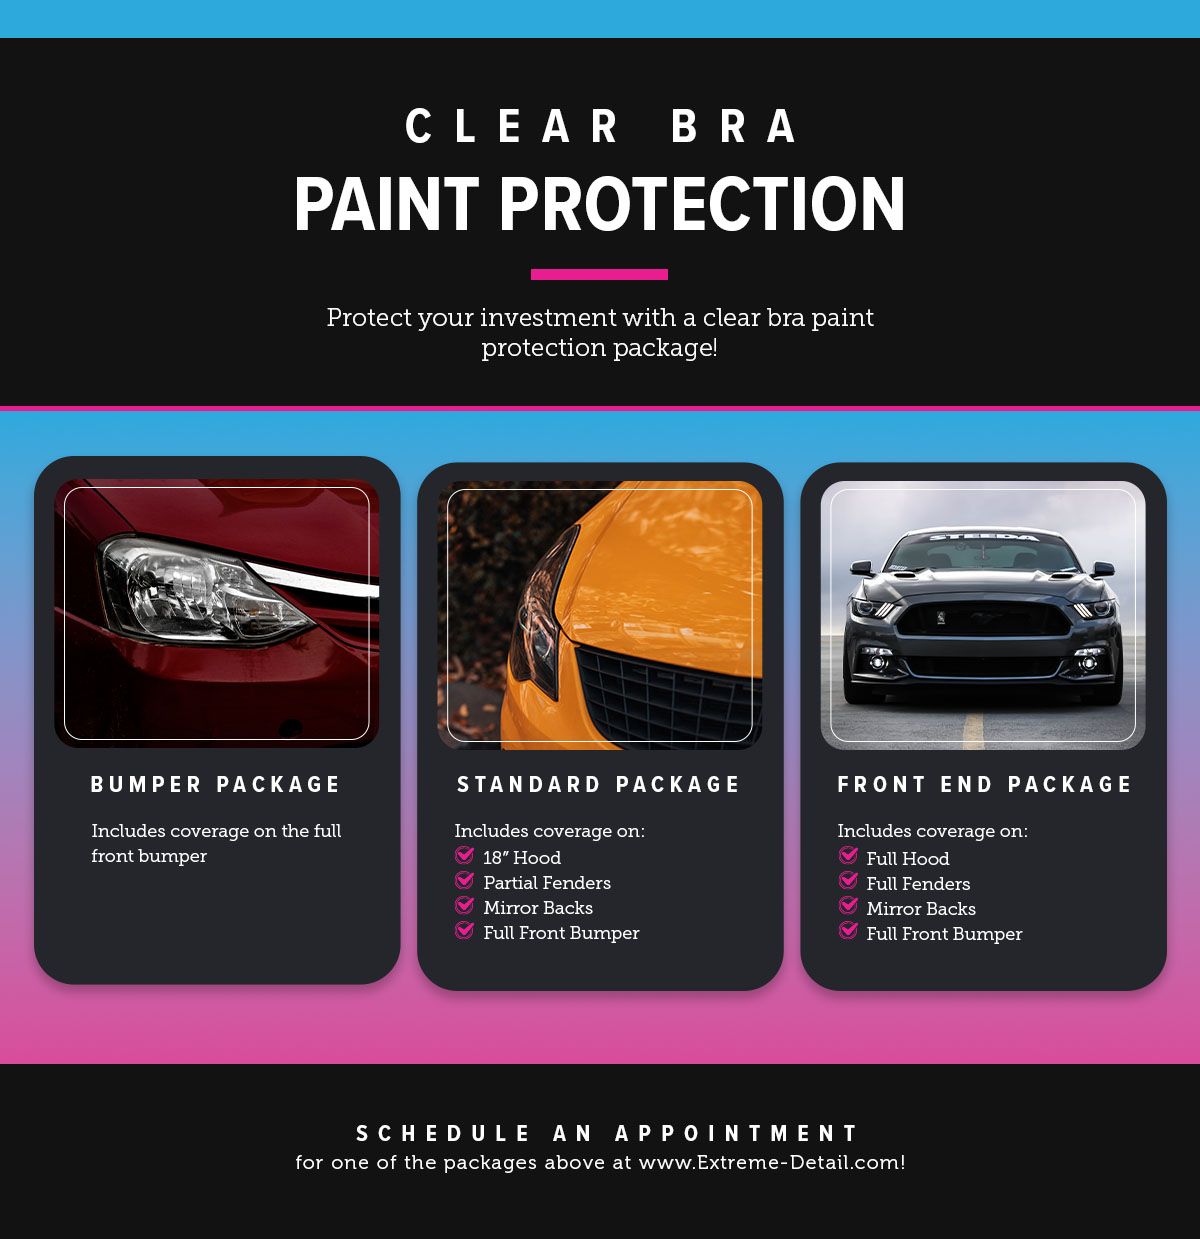 Clear Bra Paint Protection.jpg